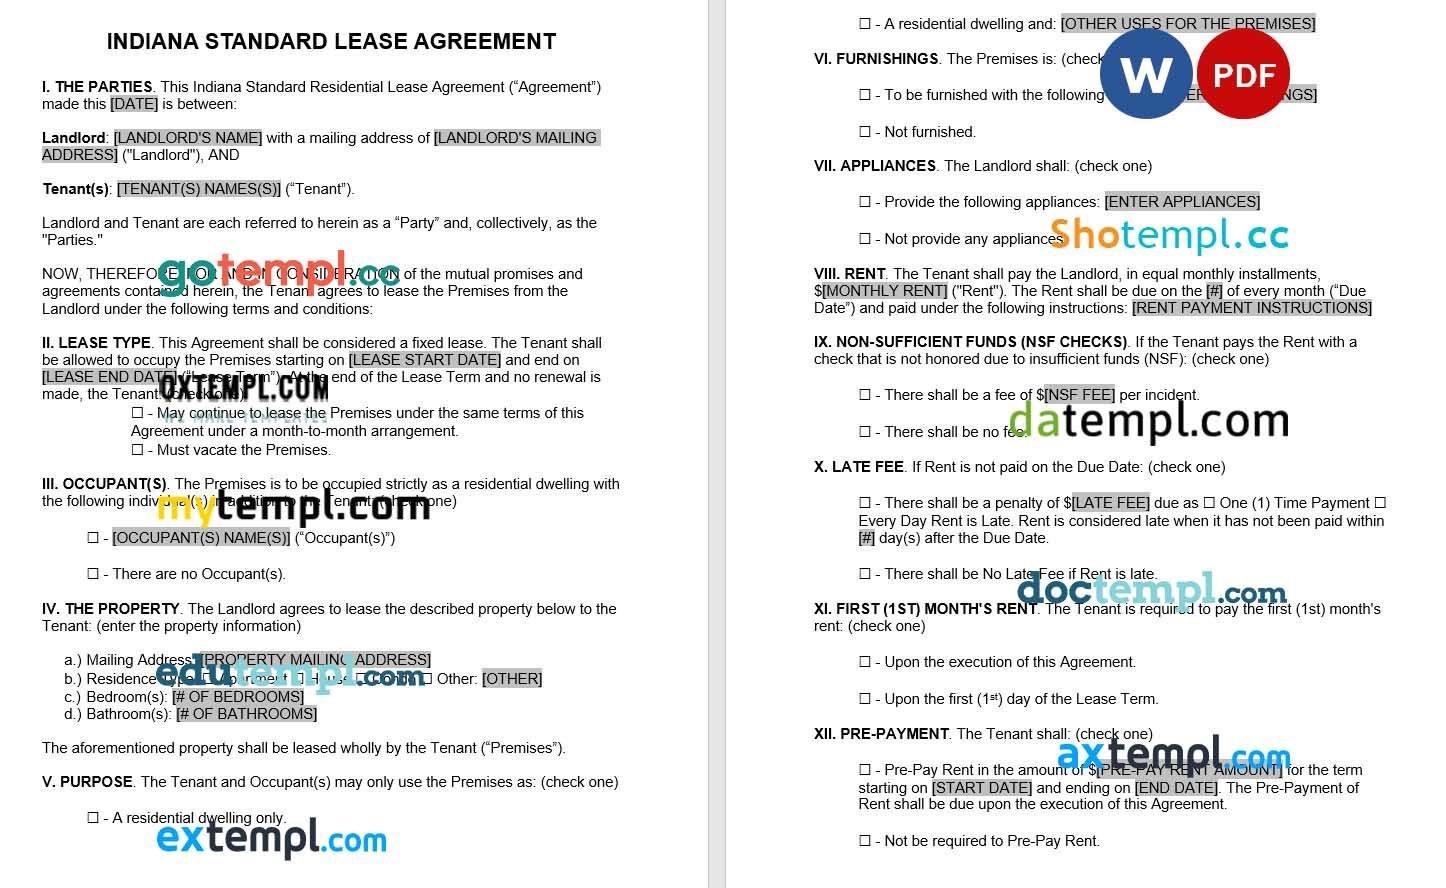 Indiana Standard Lease Agreement Word example, fully editable